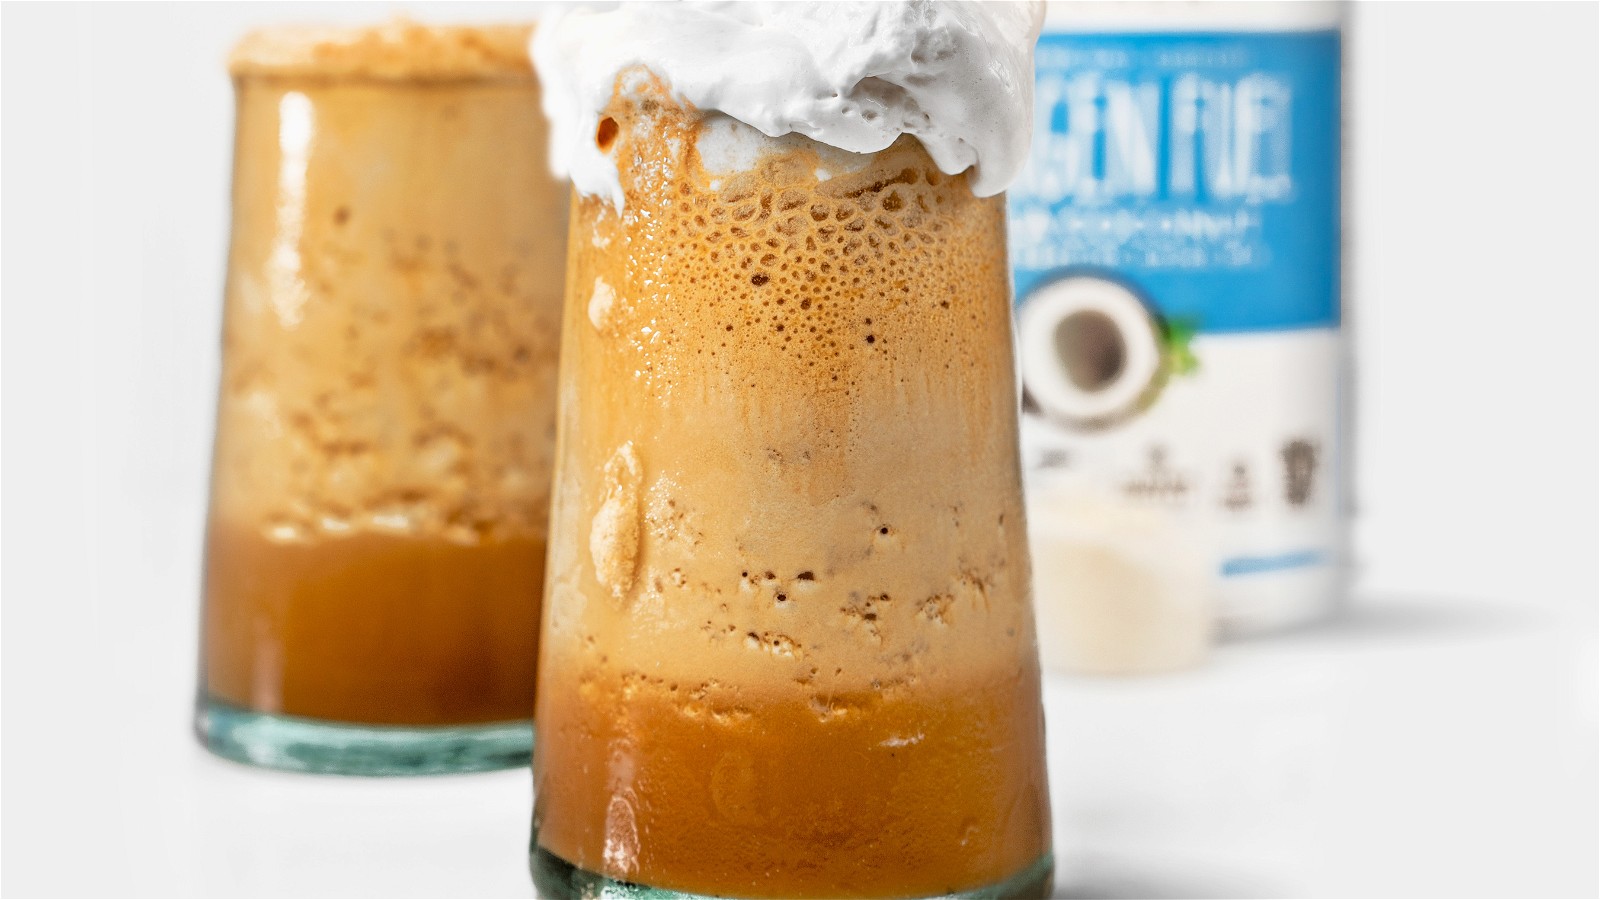 Image of No Dairy Blended Iced Collagen Coffee